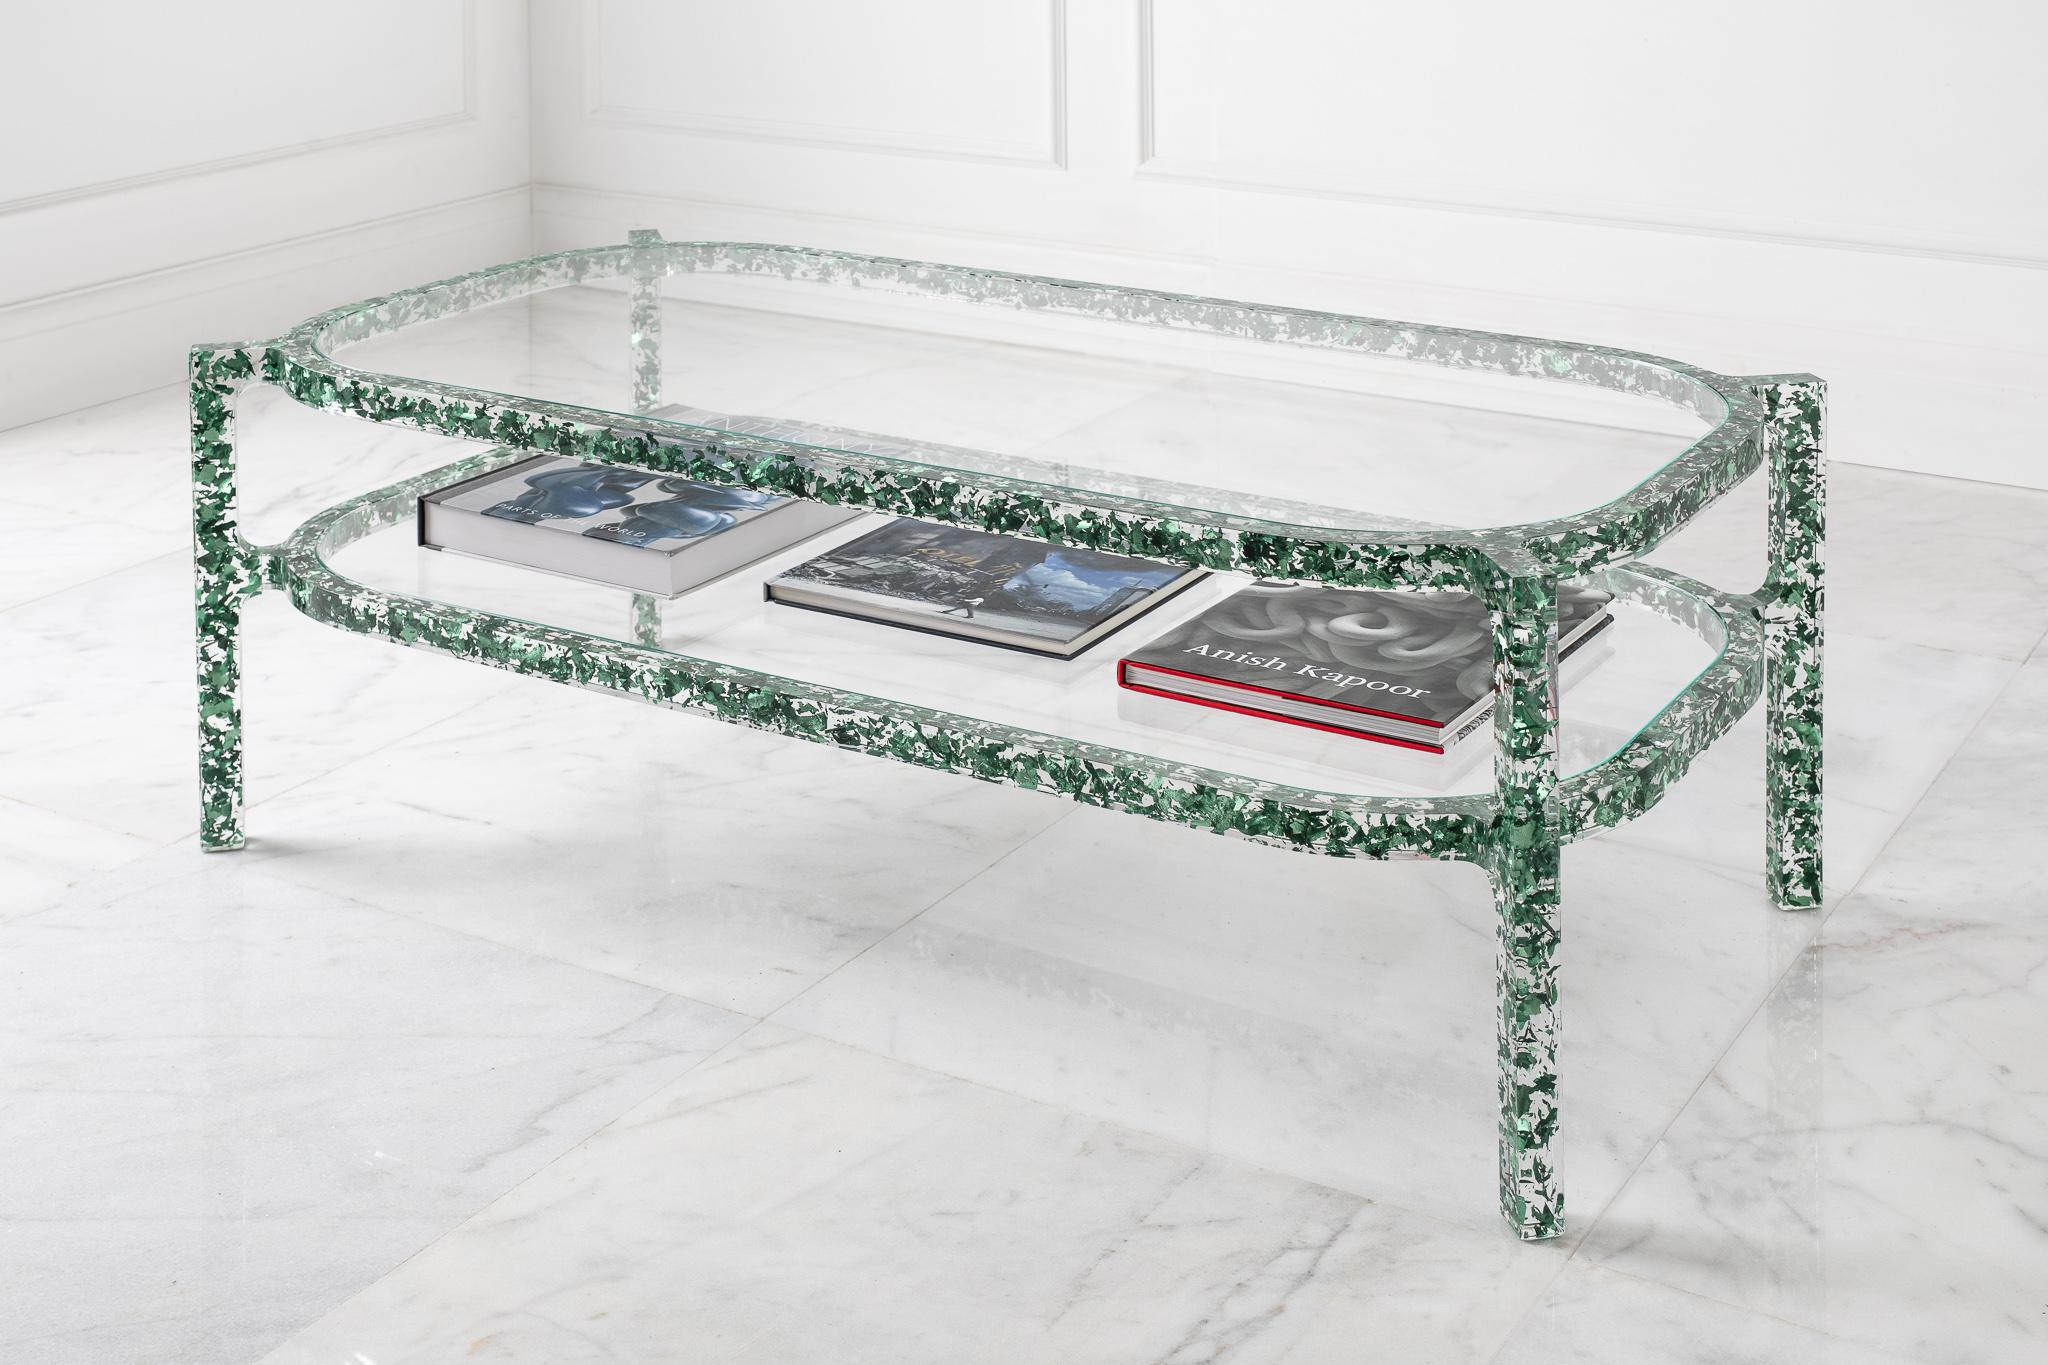 The MIDAS coffee table is comprised of carefully shredded coloured silver-leaf, all left to randomly float in the table’s crystal clear acrylic frame. Light bounces and reflects off the leaf providing a confetti-like pattern and a unique fragmented